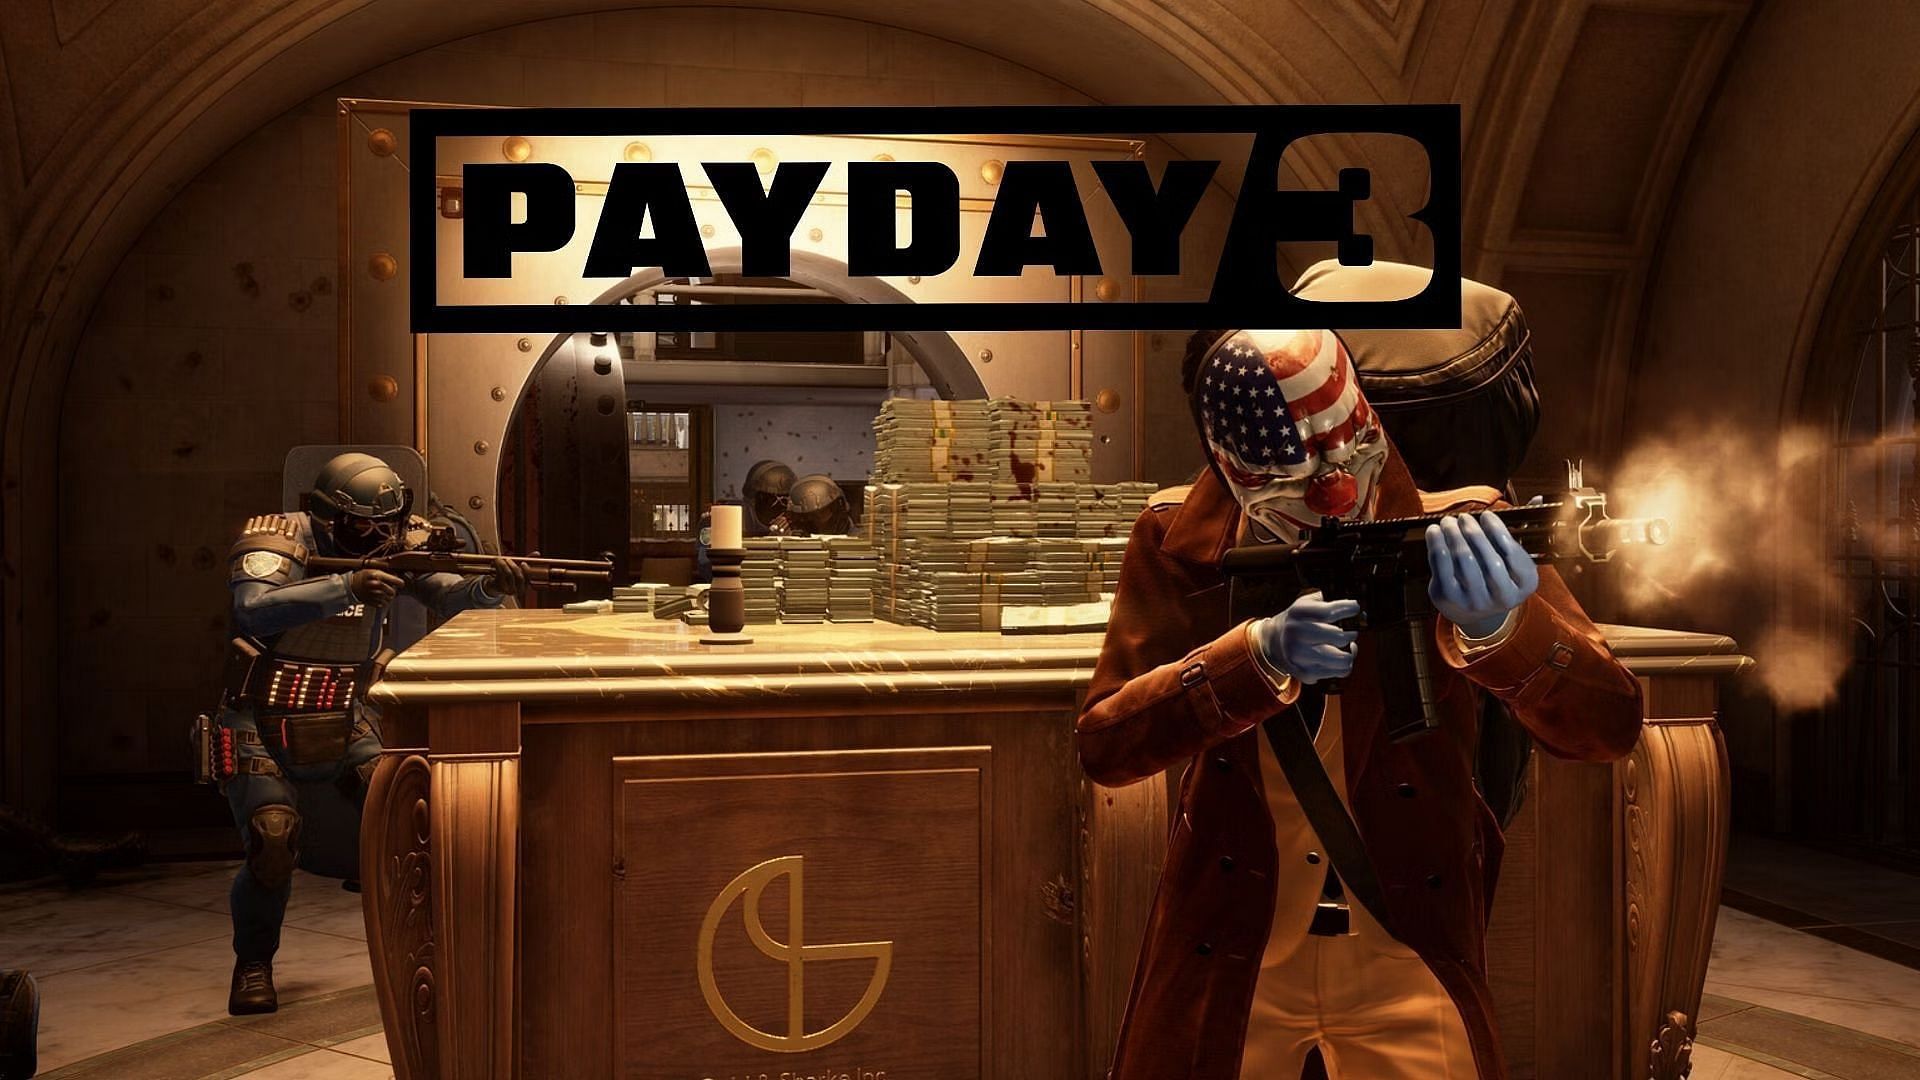  Breaking down the payday 3 